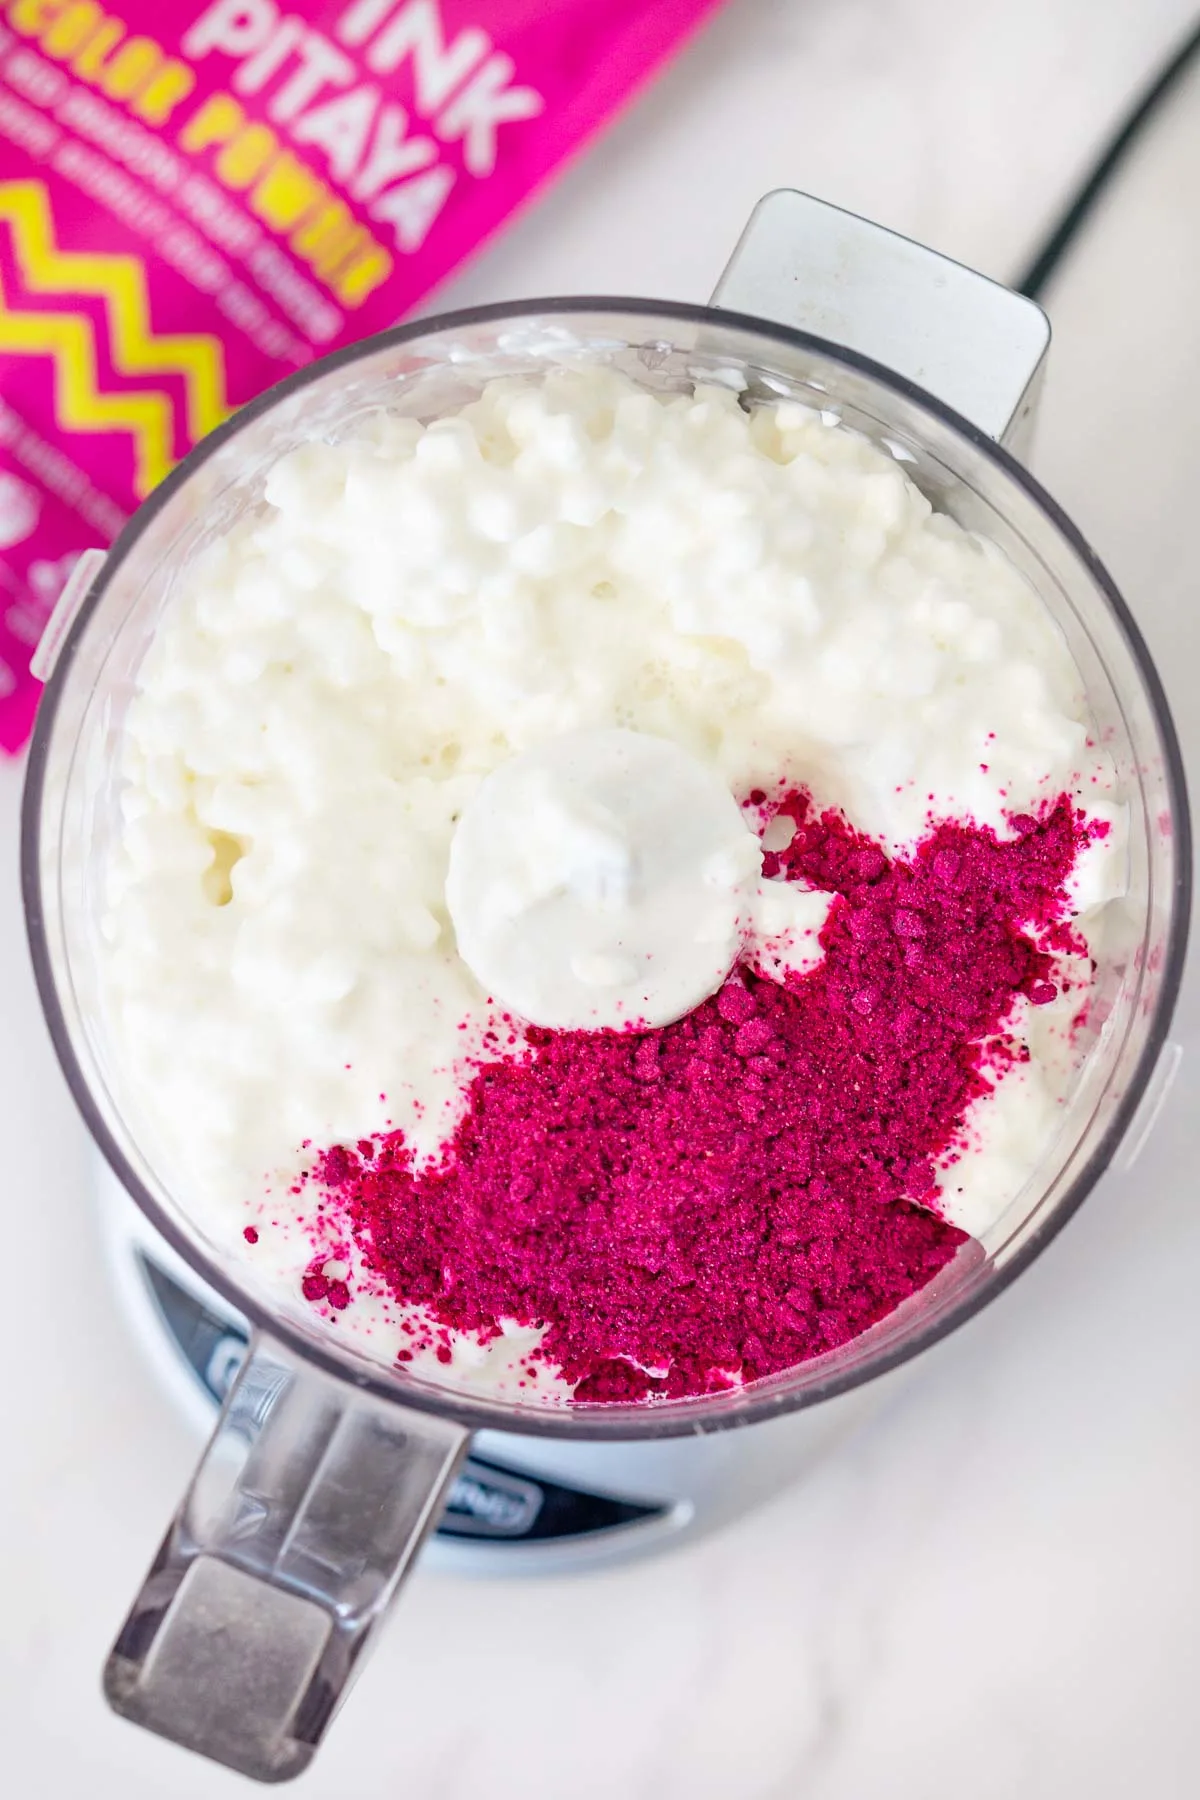 cottage cheese and dragon fruit powder in a food processor